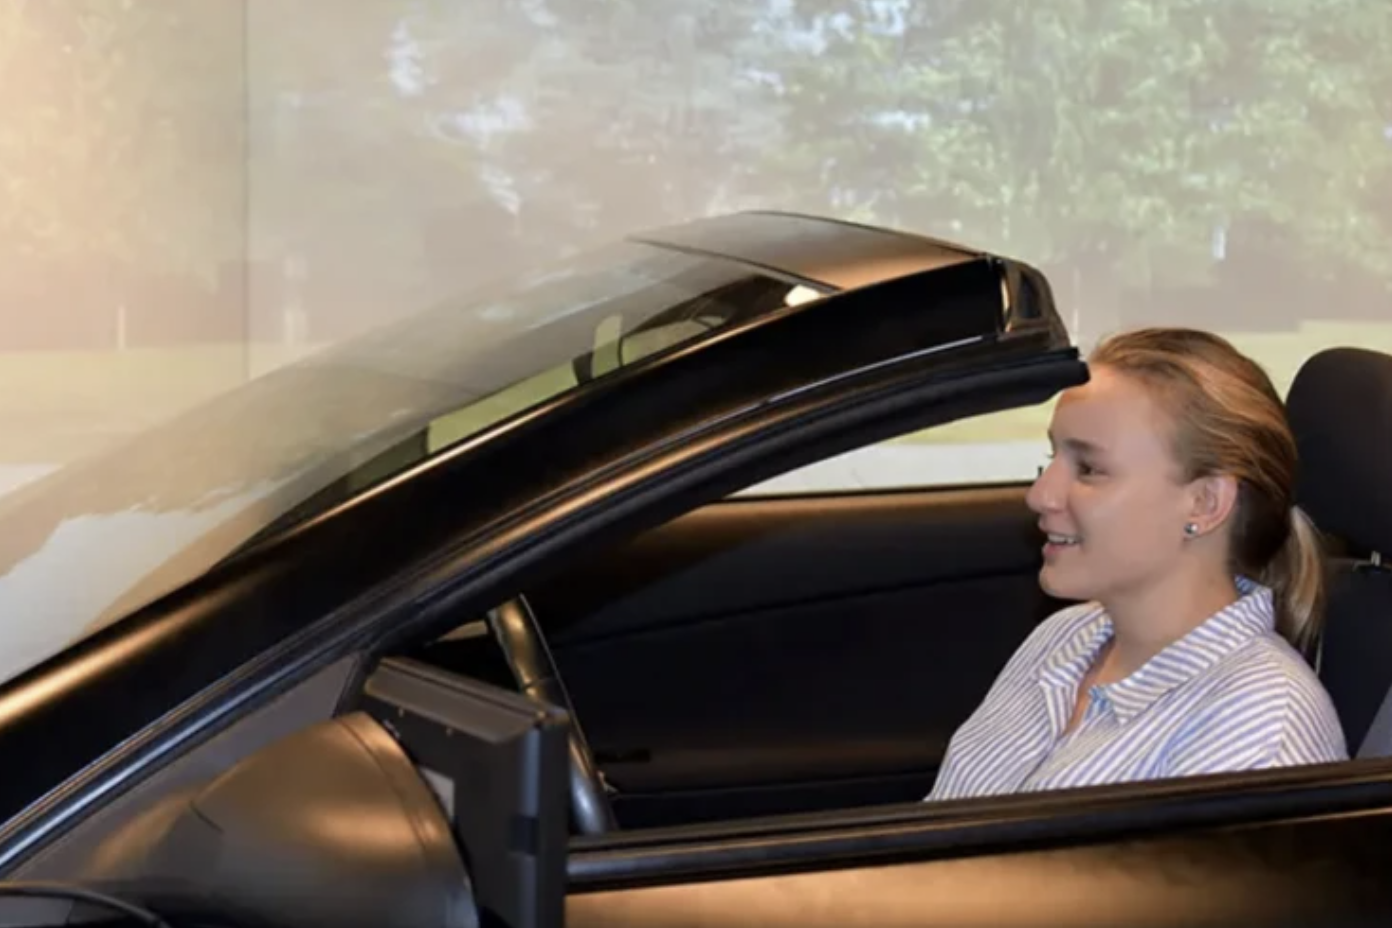 Image of Erika in vehicle in DRiVE lab